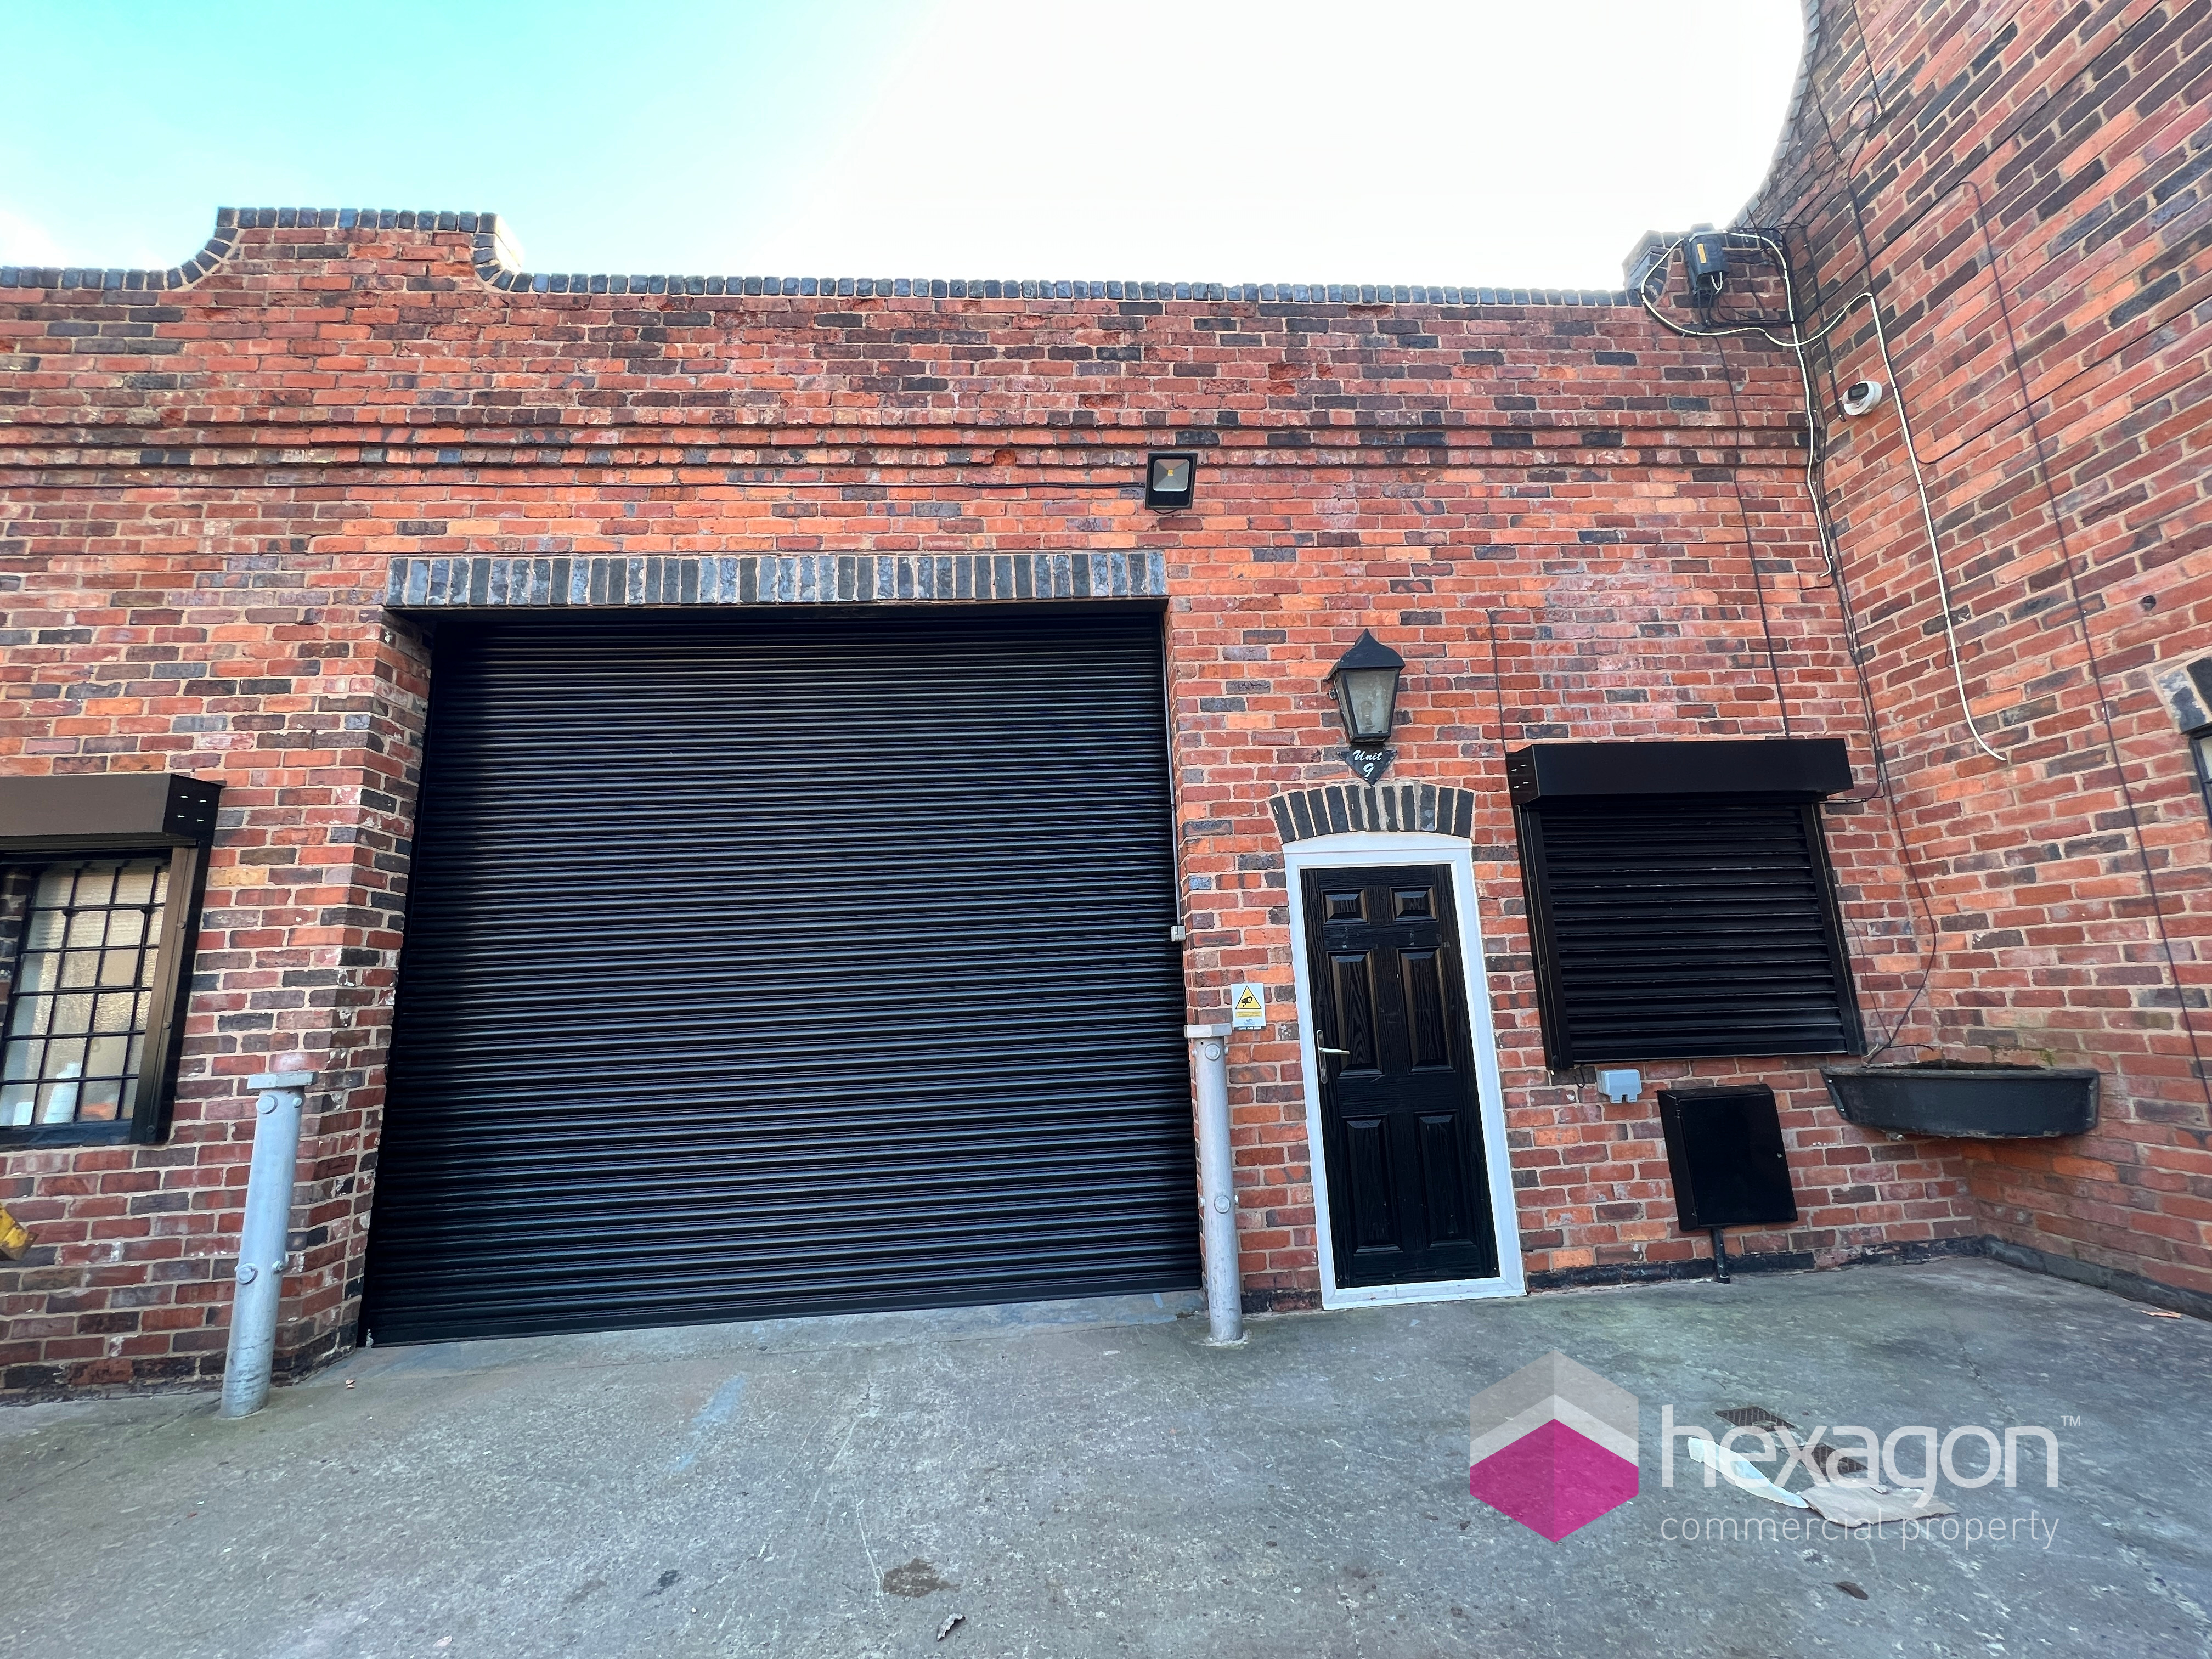 0 bed Light Industrial for rent in Cradley Heath. From Hexagon Commercial Property